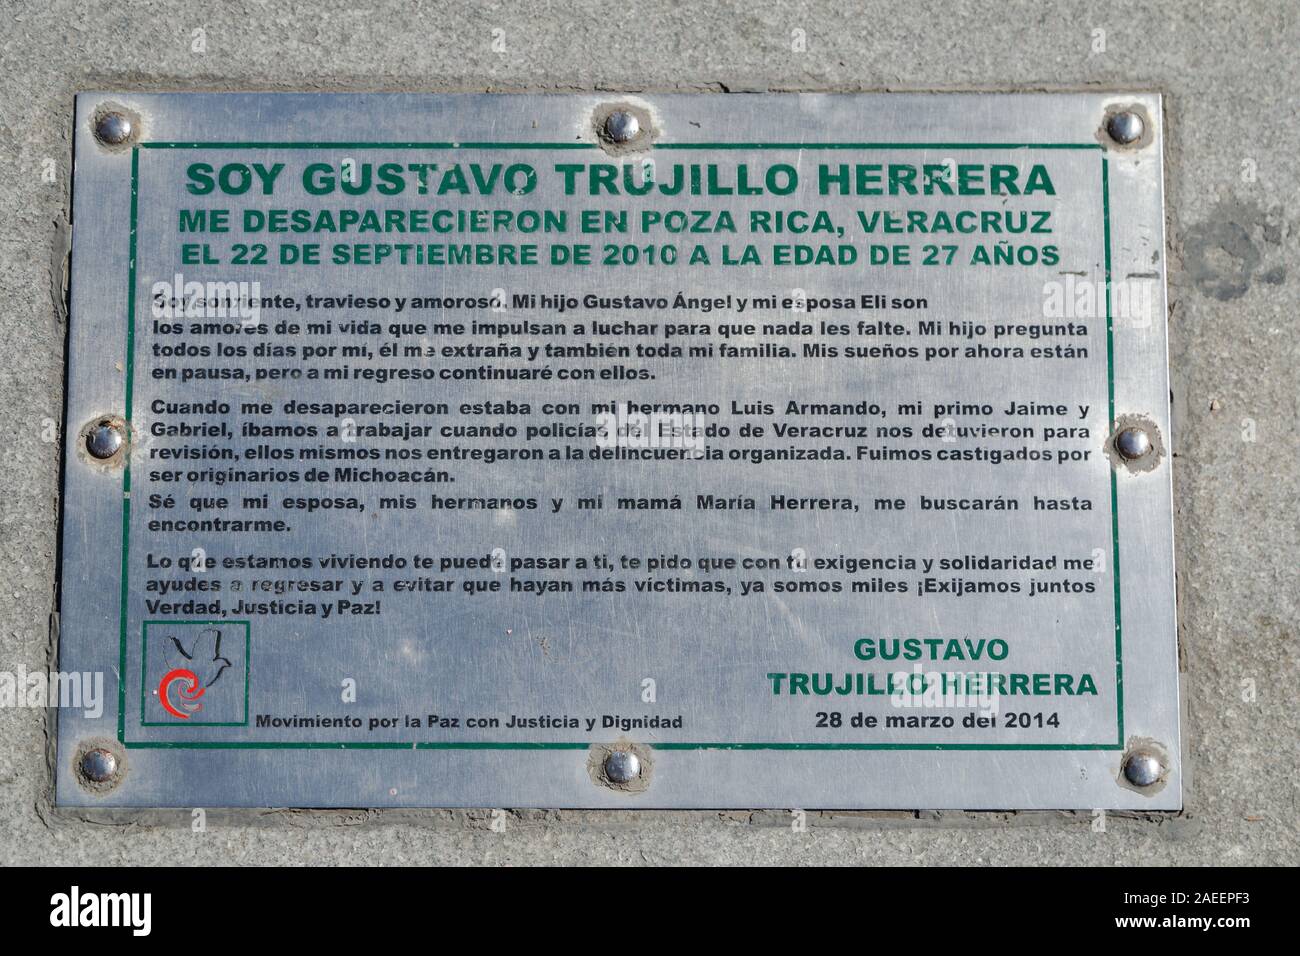 A detail view of the one of plaquse installed at Estela de Luz outside Chapultepec Park about missing persons in drug wars, Mexico City, Mexico. Stock Photo